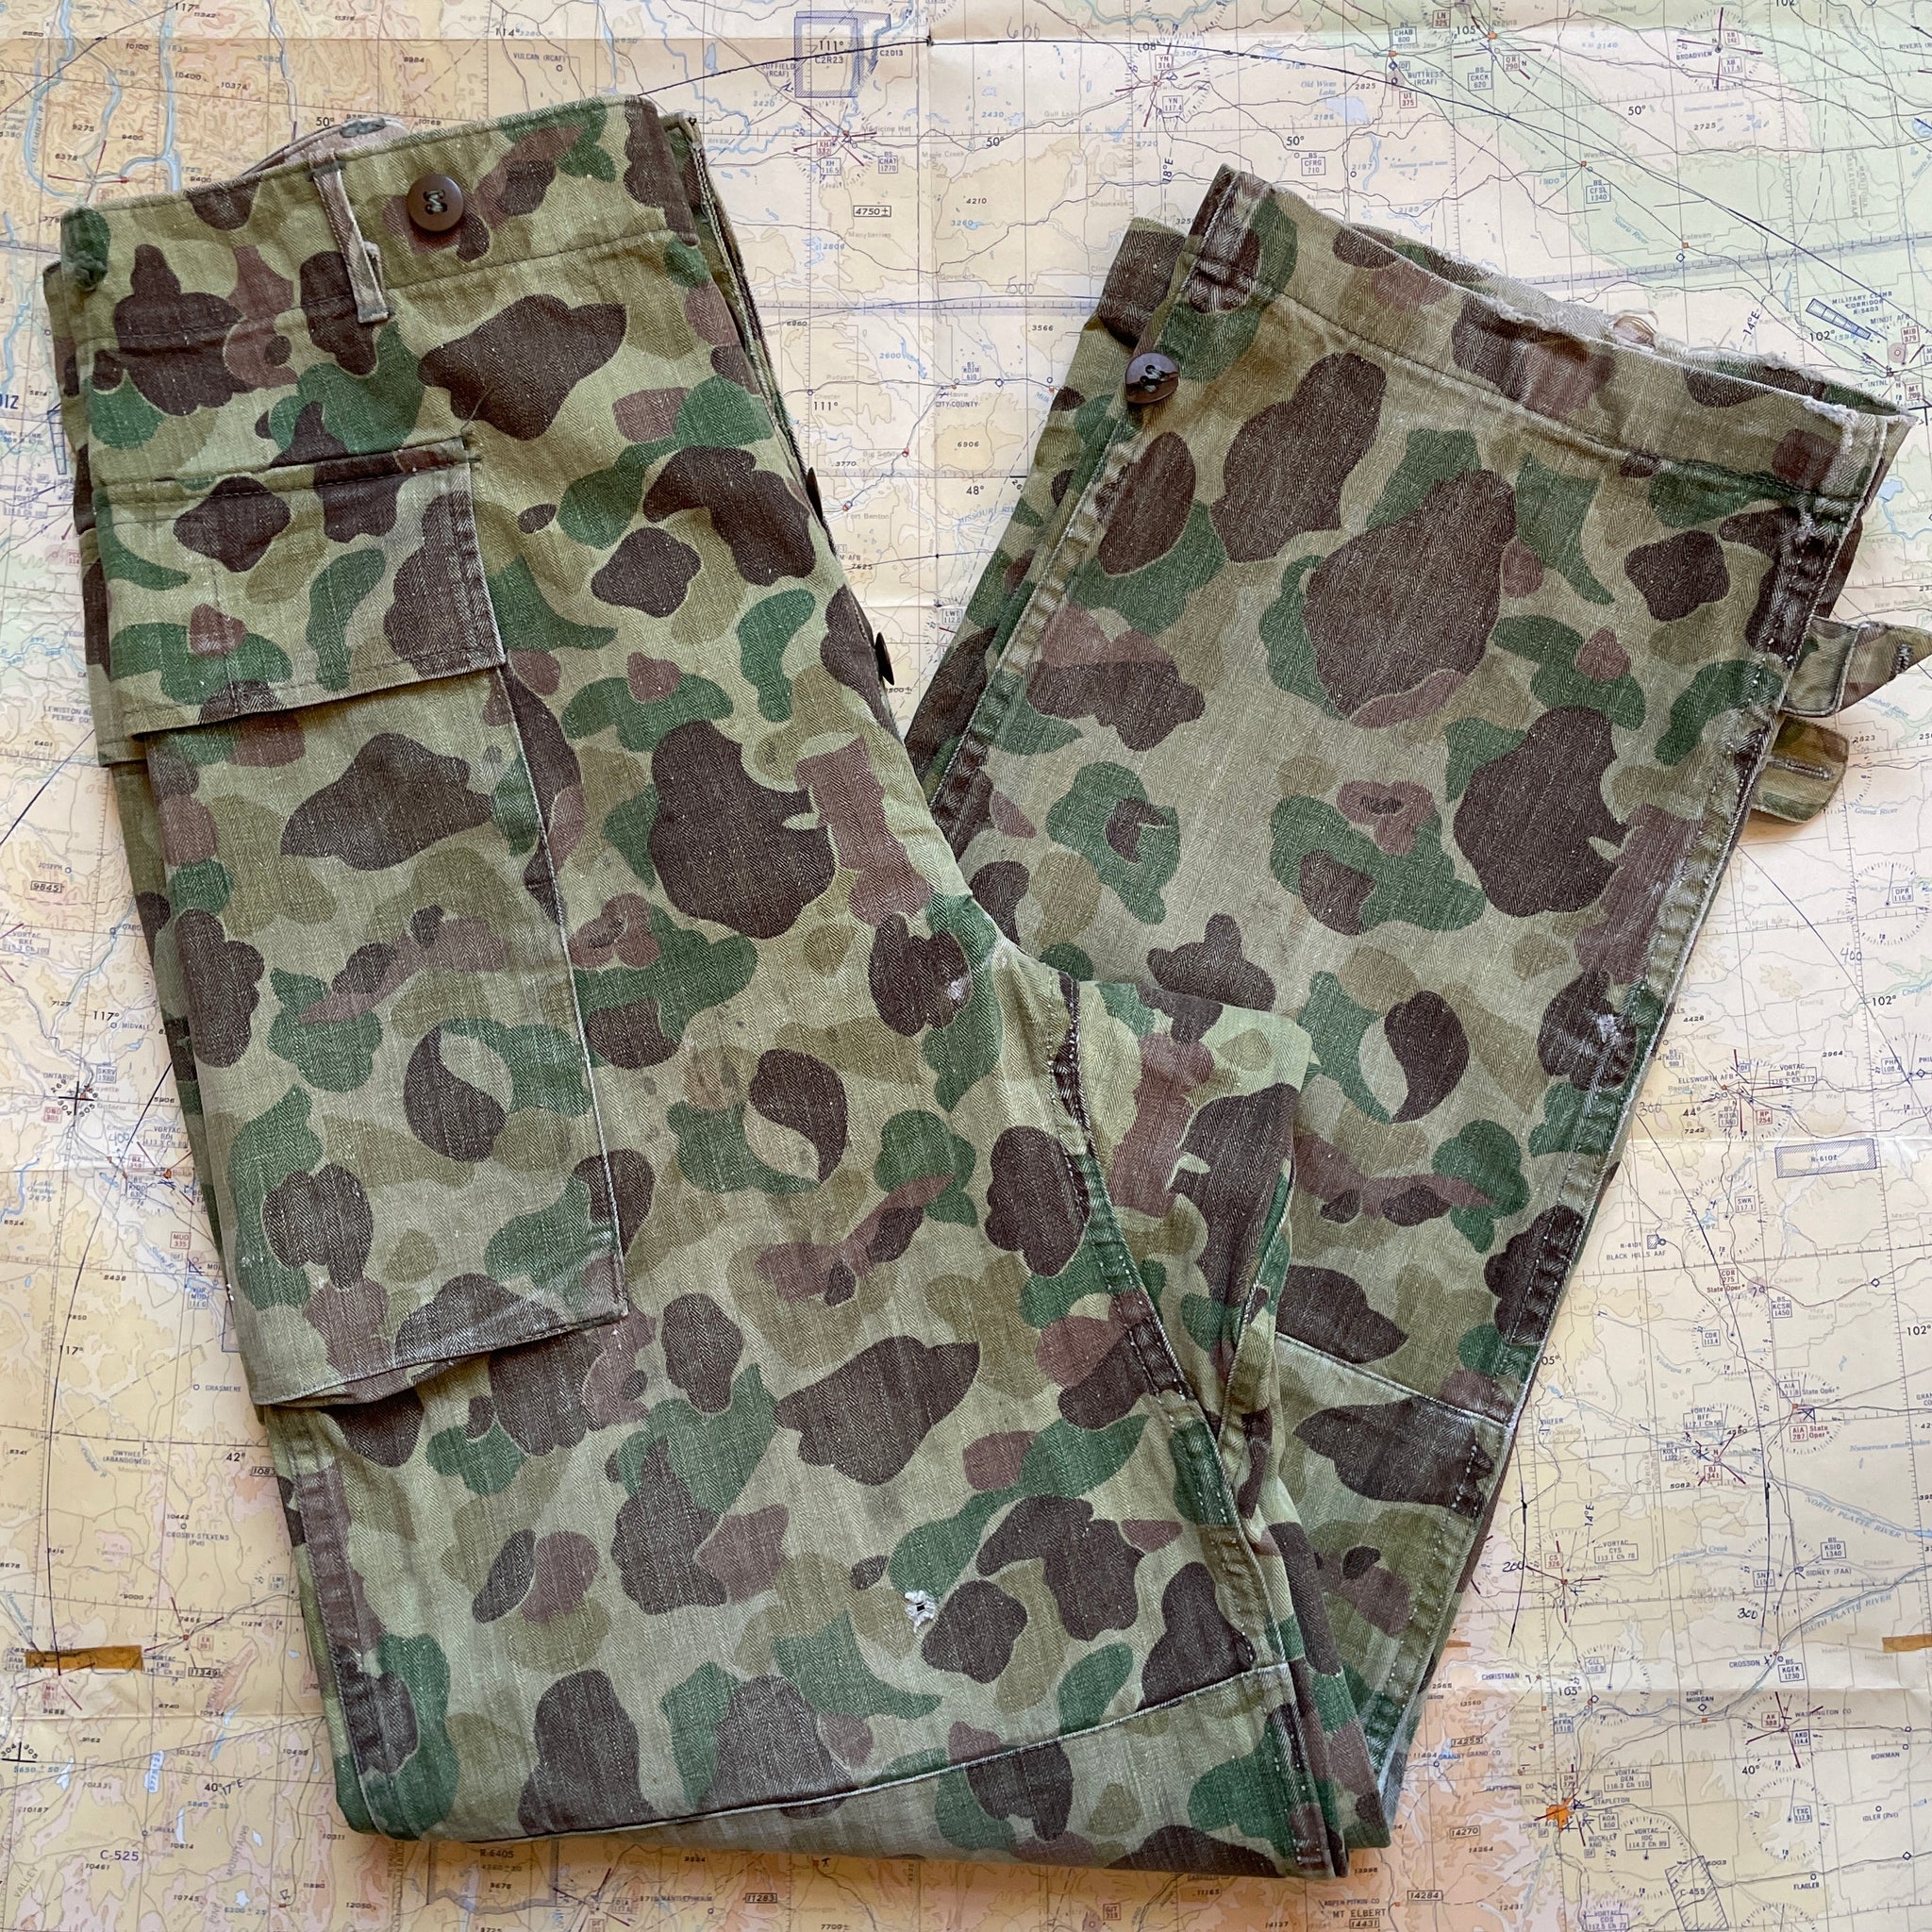 IDOGEAR G3 Combat Pants Multicam Men Tactical Pants with Knee Pads Airsoft  Hunting Military Paintball Tactical Camo Trousers (Multi-camo Multi-camo,  38W x 33L) : Amazon.in: Clothing & Accessories